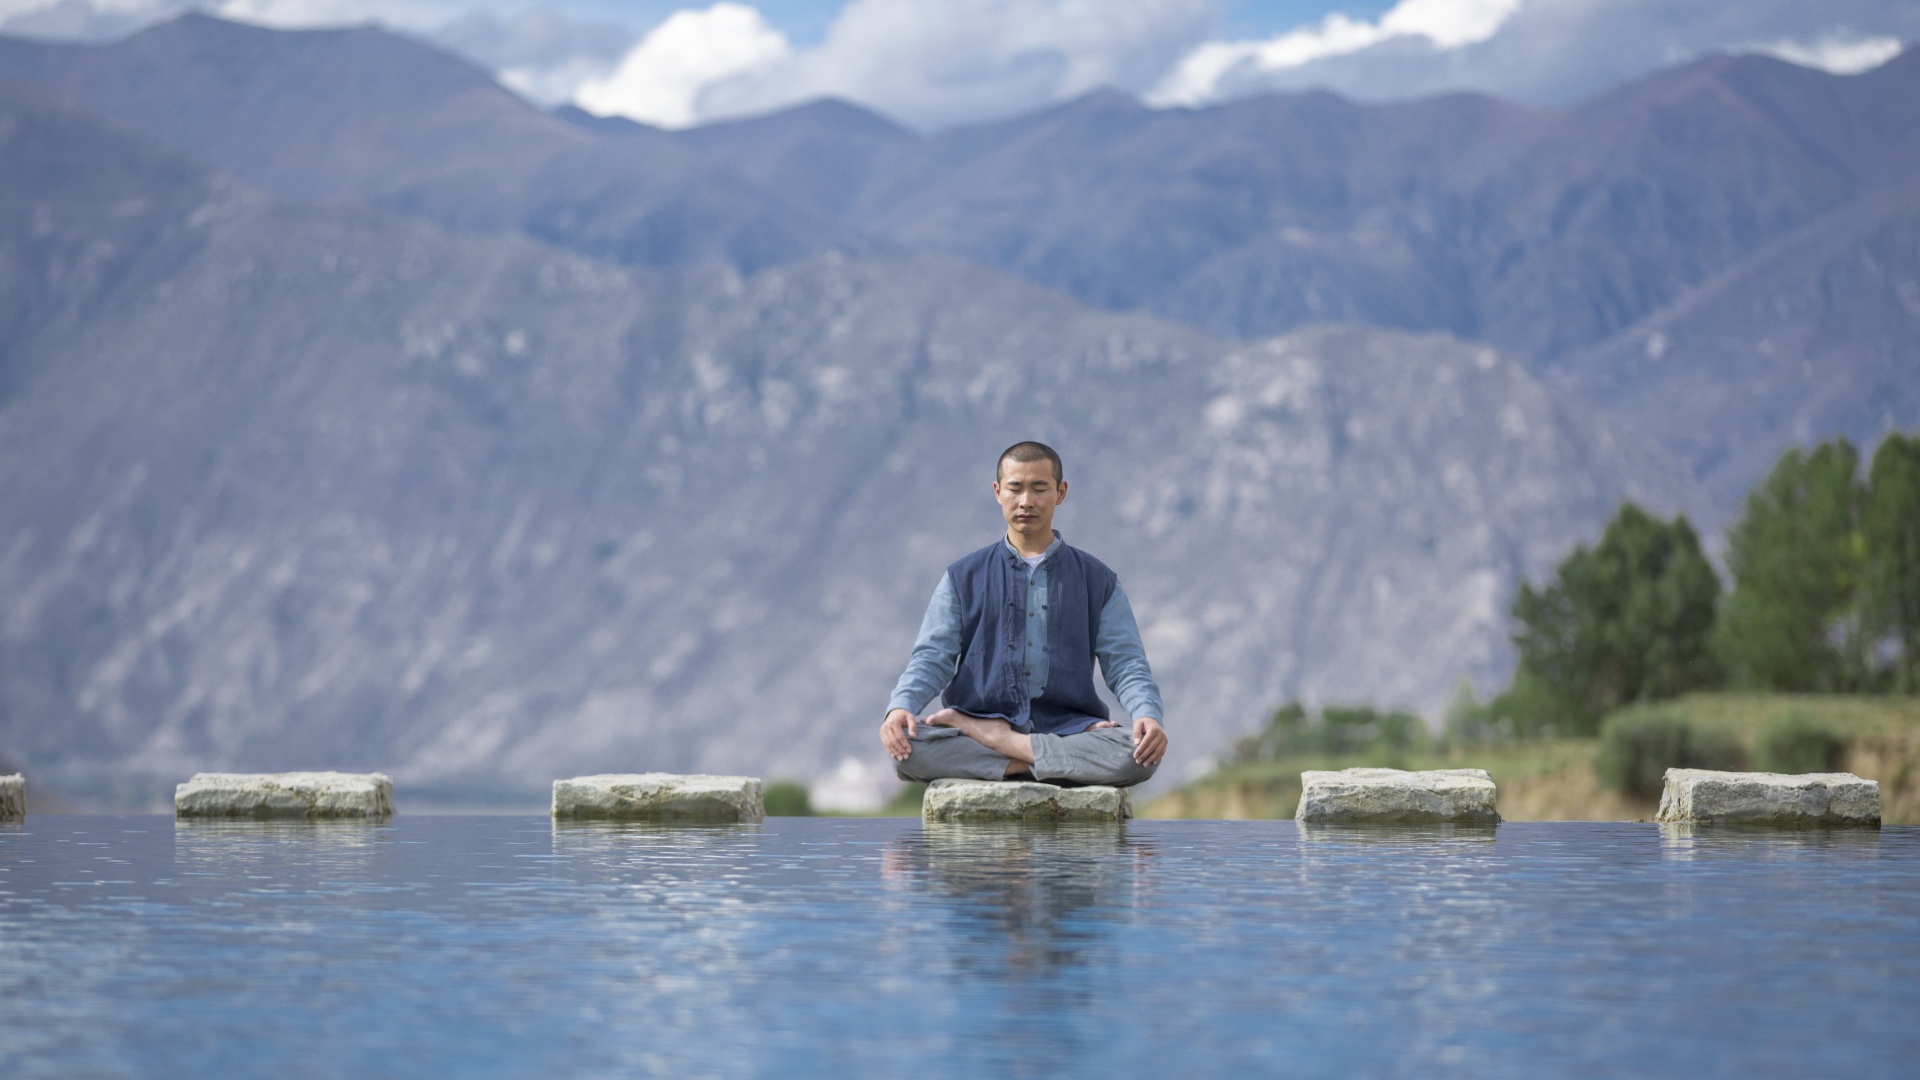 Asian man in lotus position meditates by the water.